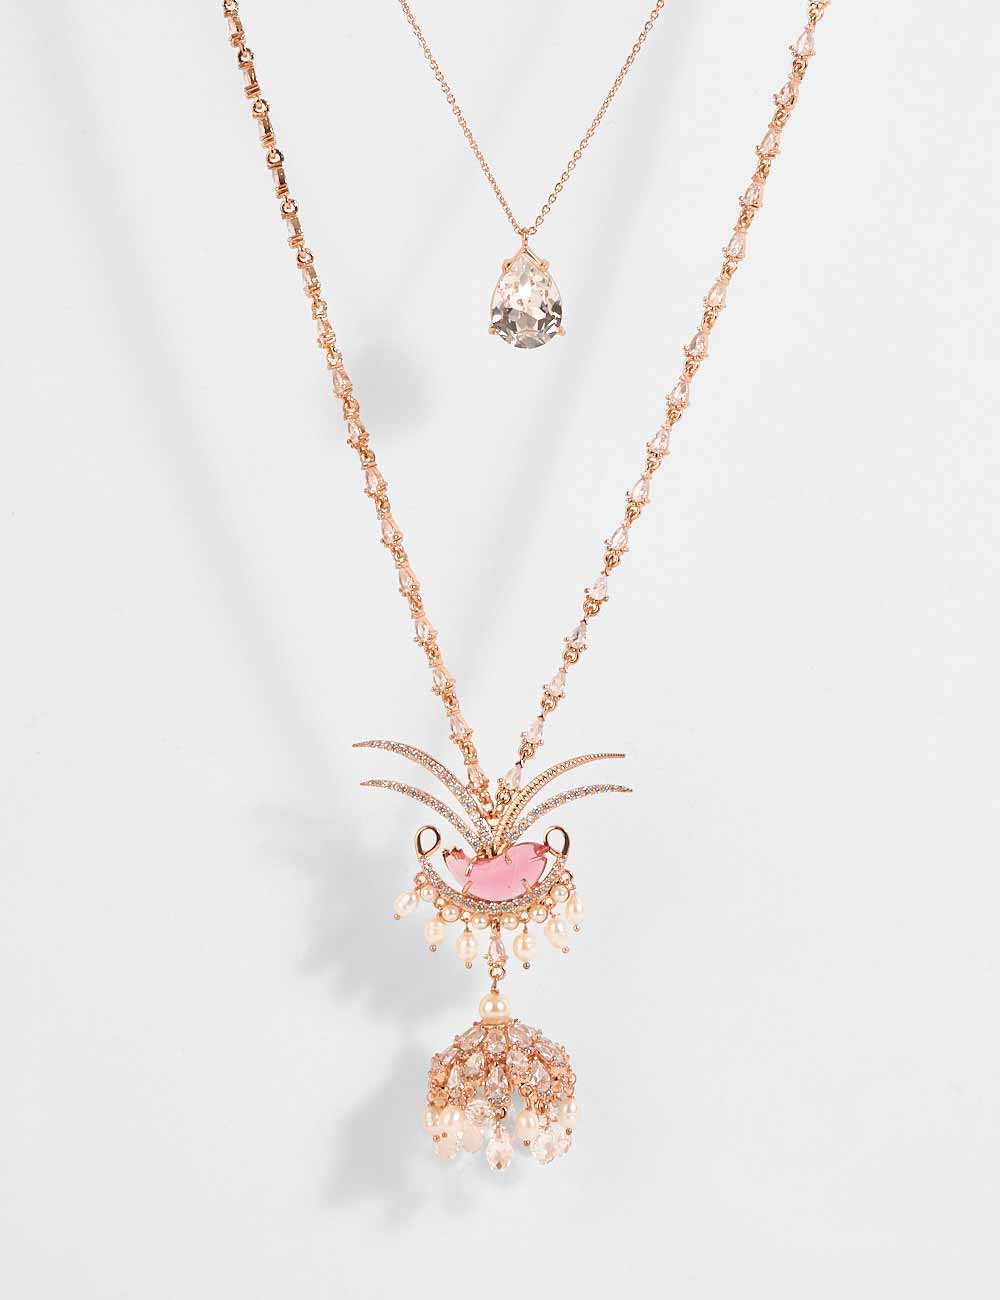 Le Palm Fish Layered Necklace